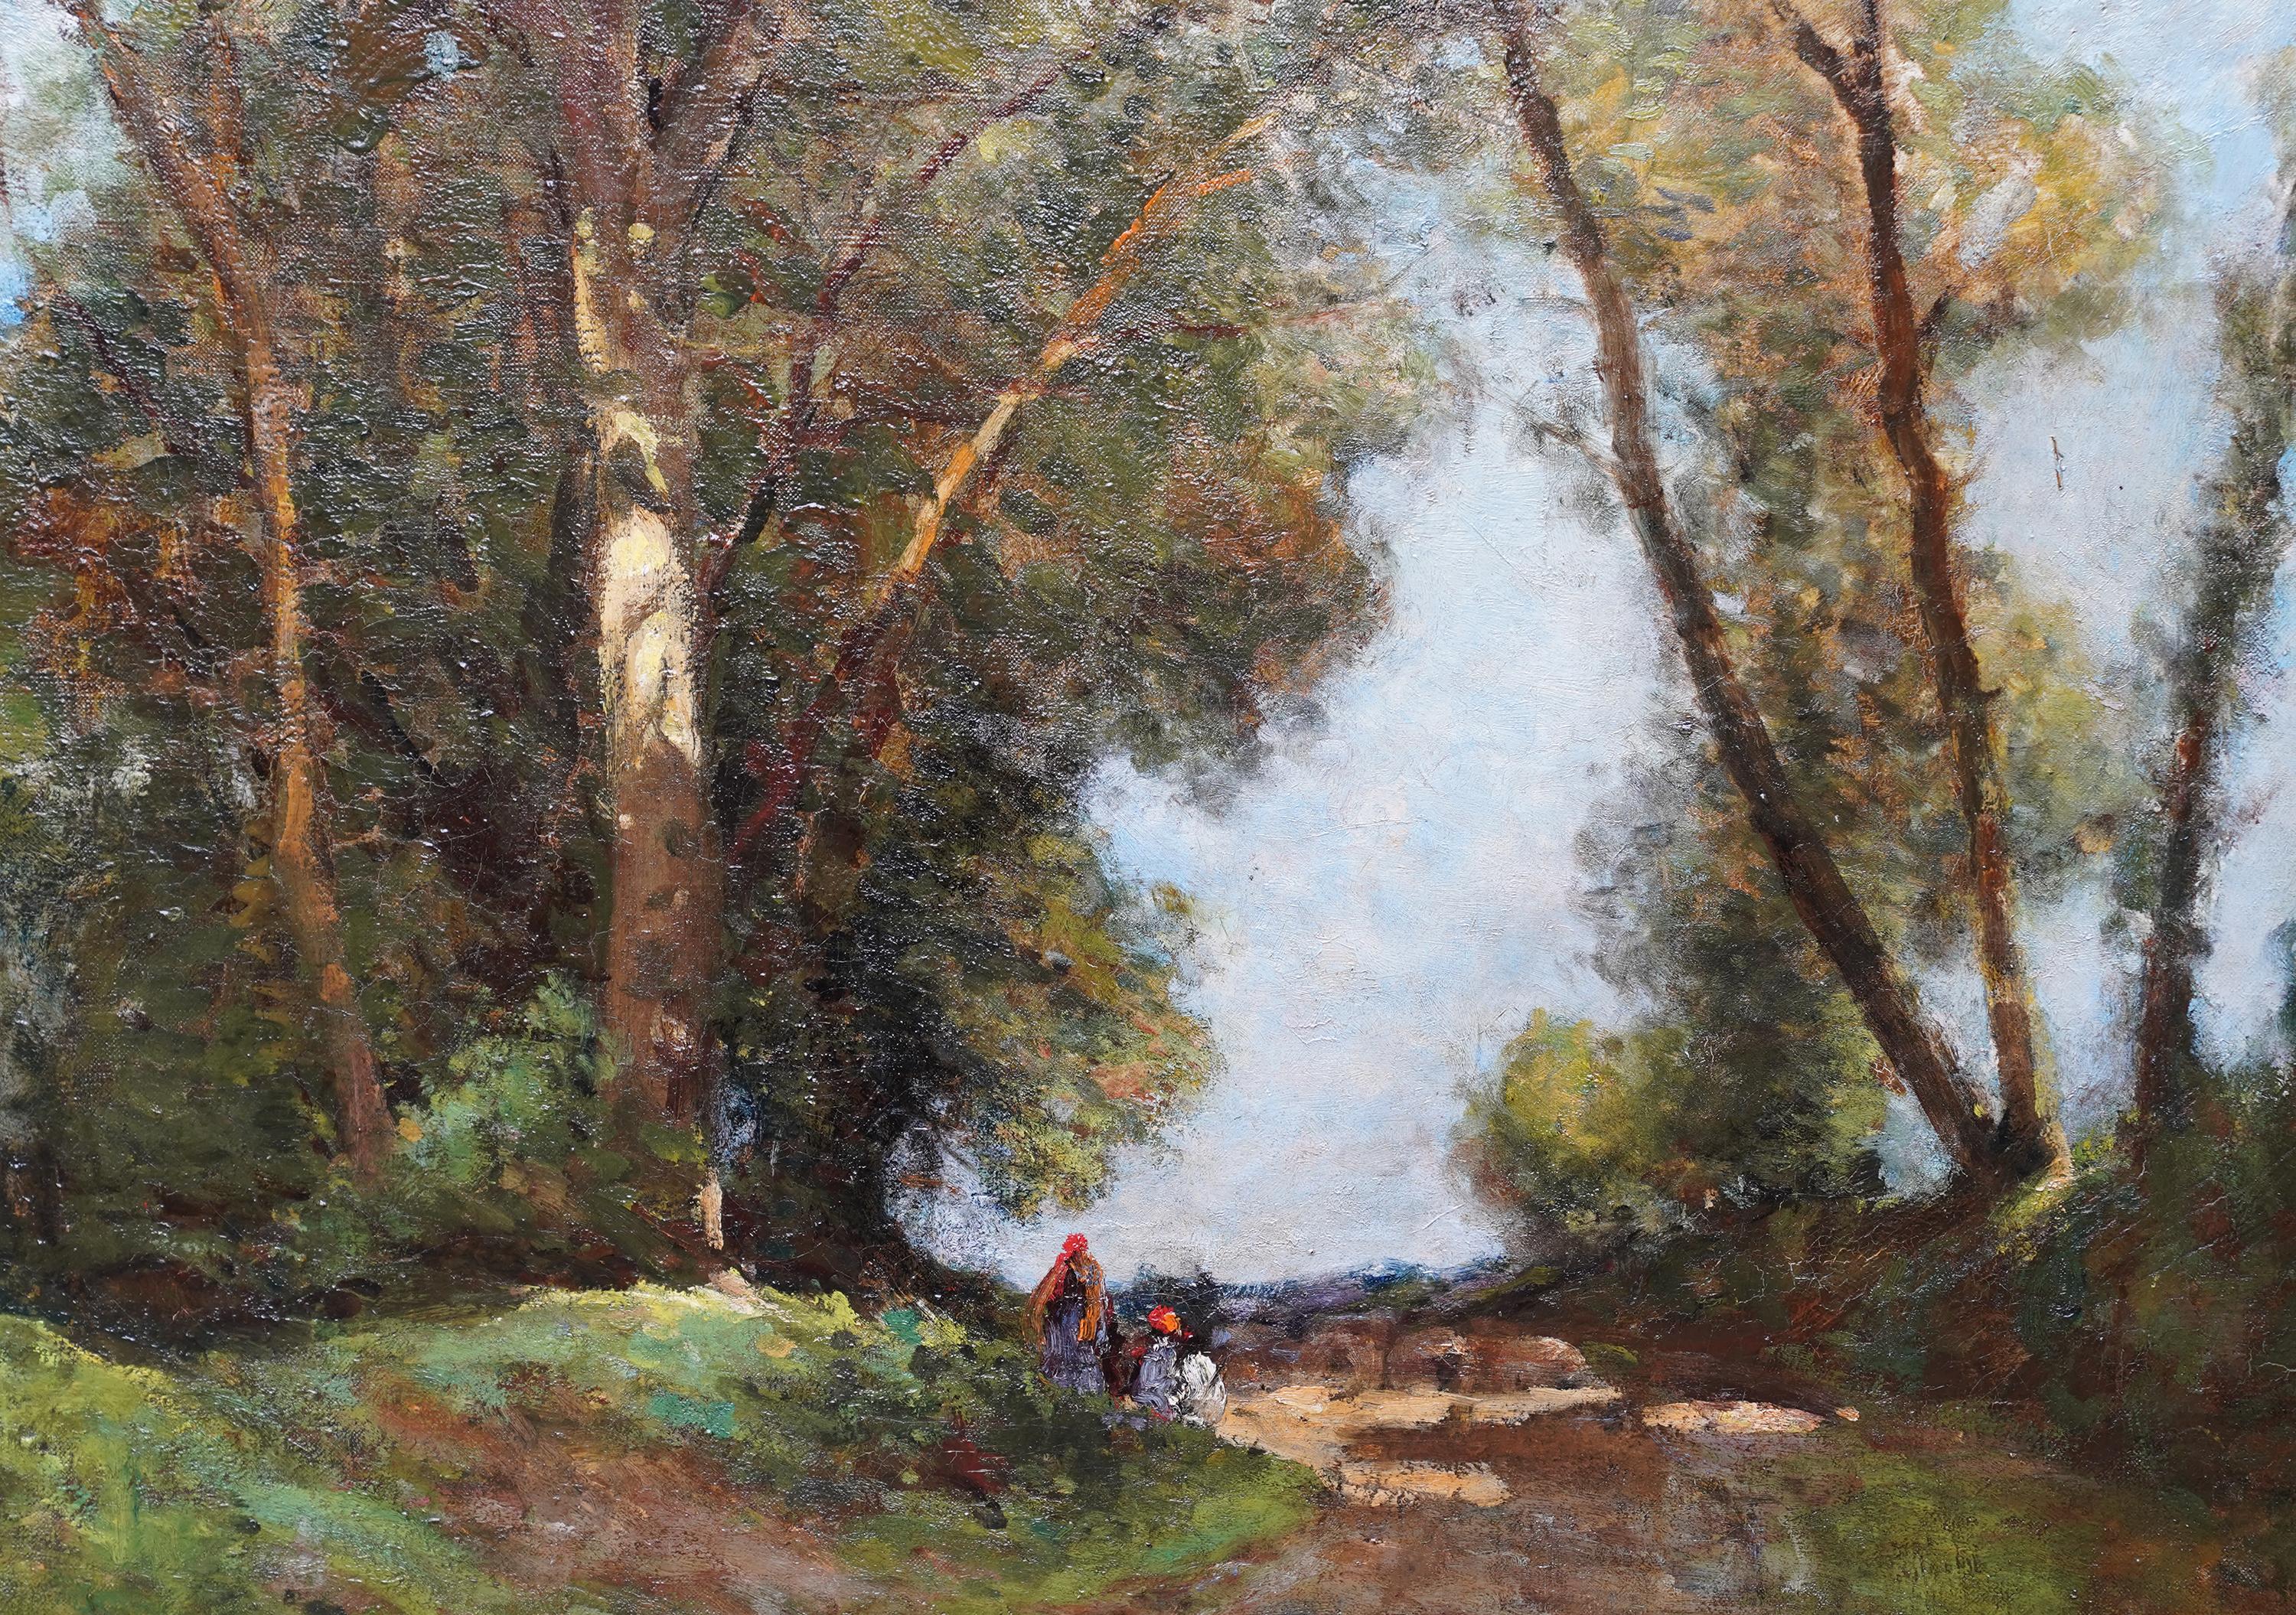 This charming British Edwardian oil painting is attributed to the circle of Tom Mostyn. Painted circa 1910 it is a wooded landscape with figures stopping to rest on a path bathed in dappled sunlight. Above them stand majestic trees stretching up to